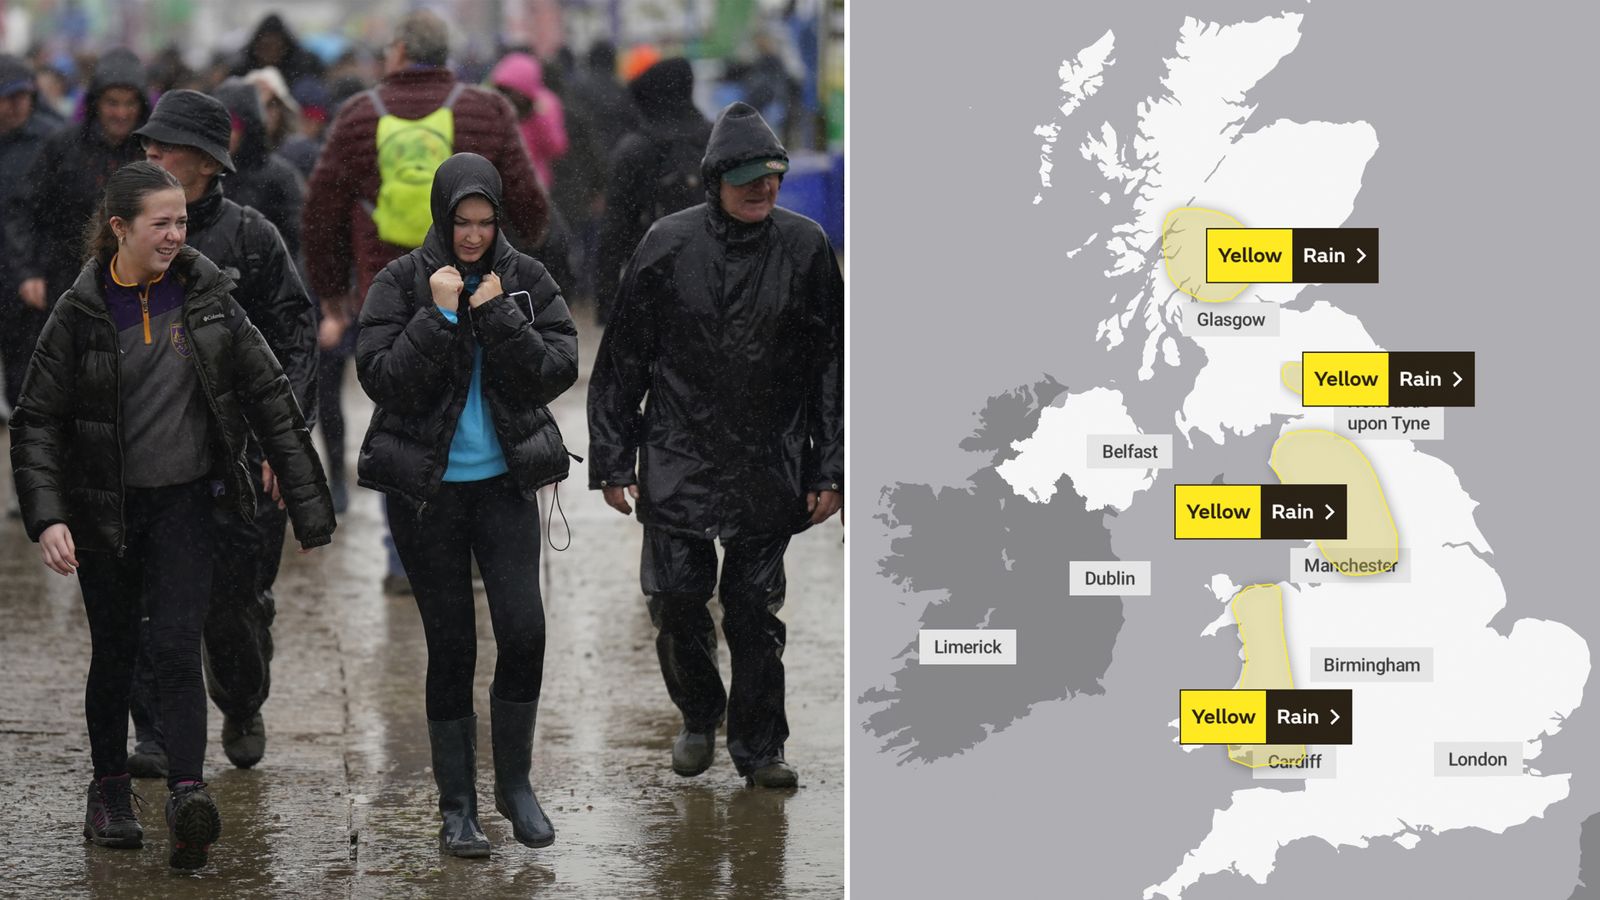 UK weather: Remnants of two hurricanes sweeping the country this week - with weather warnings in place